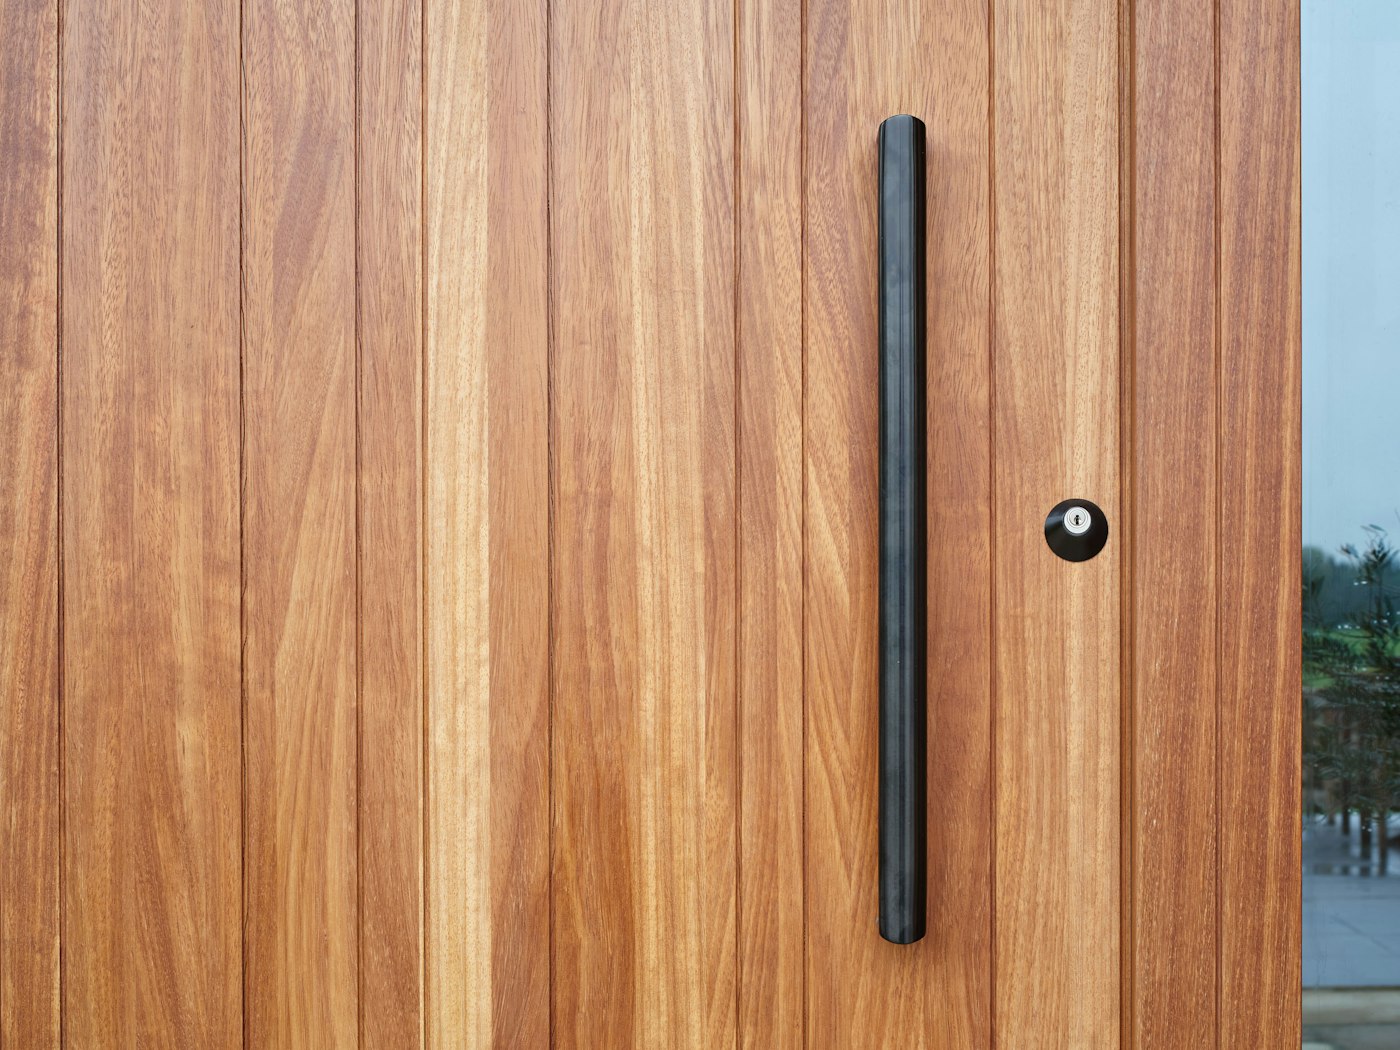 The  beautiful iroko woodgrain is offset by the simple contemporary option handle